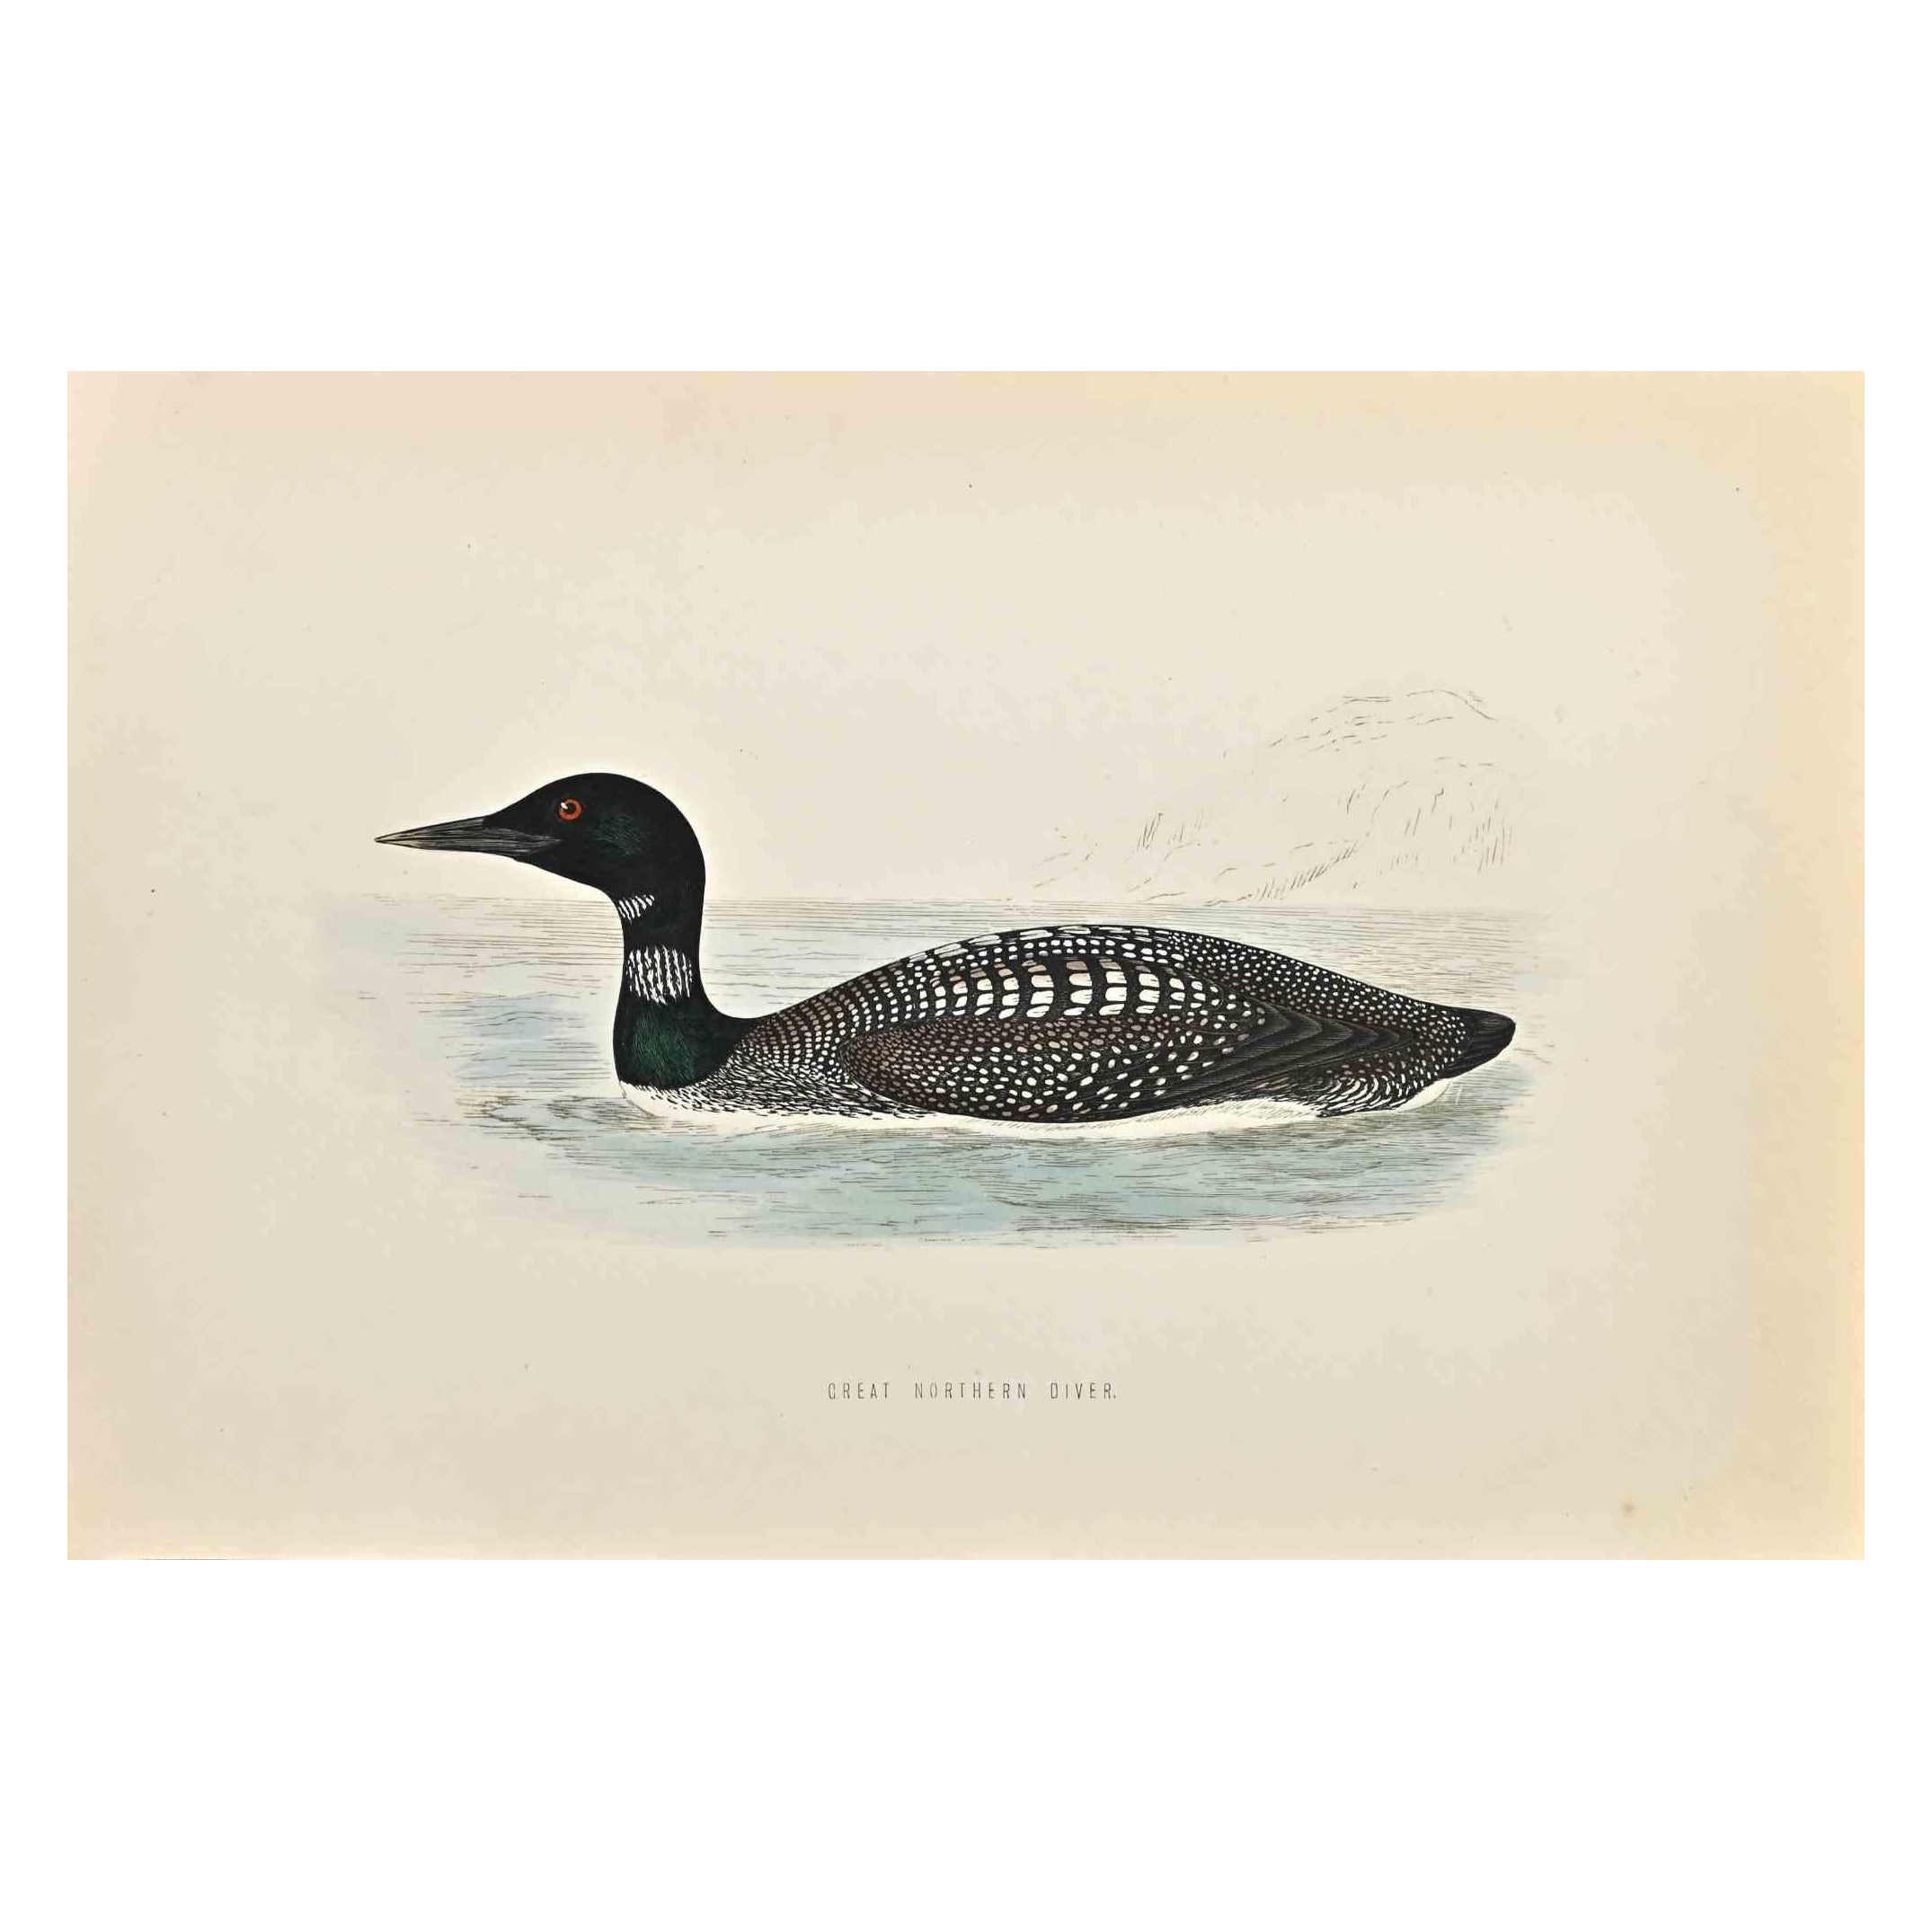 Great Northern Diver is a modern artwork realized in 1870 by the British artist Alexander Francis Lydon (1836-1917).

Woodcut print on ivory-colored paper.

Hand-colored, published by London, Bell & Sons, 1870.  

The name of the bird is printed on